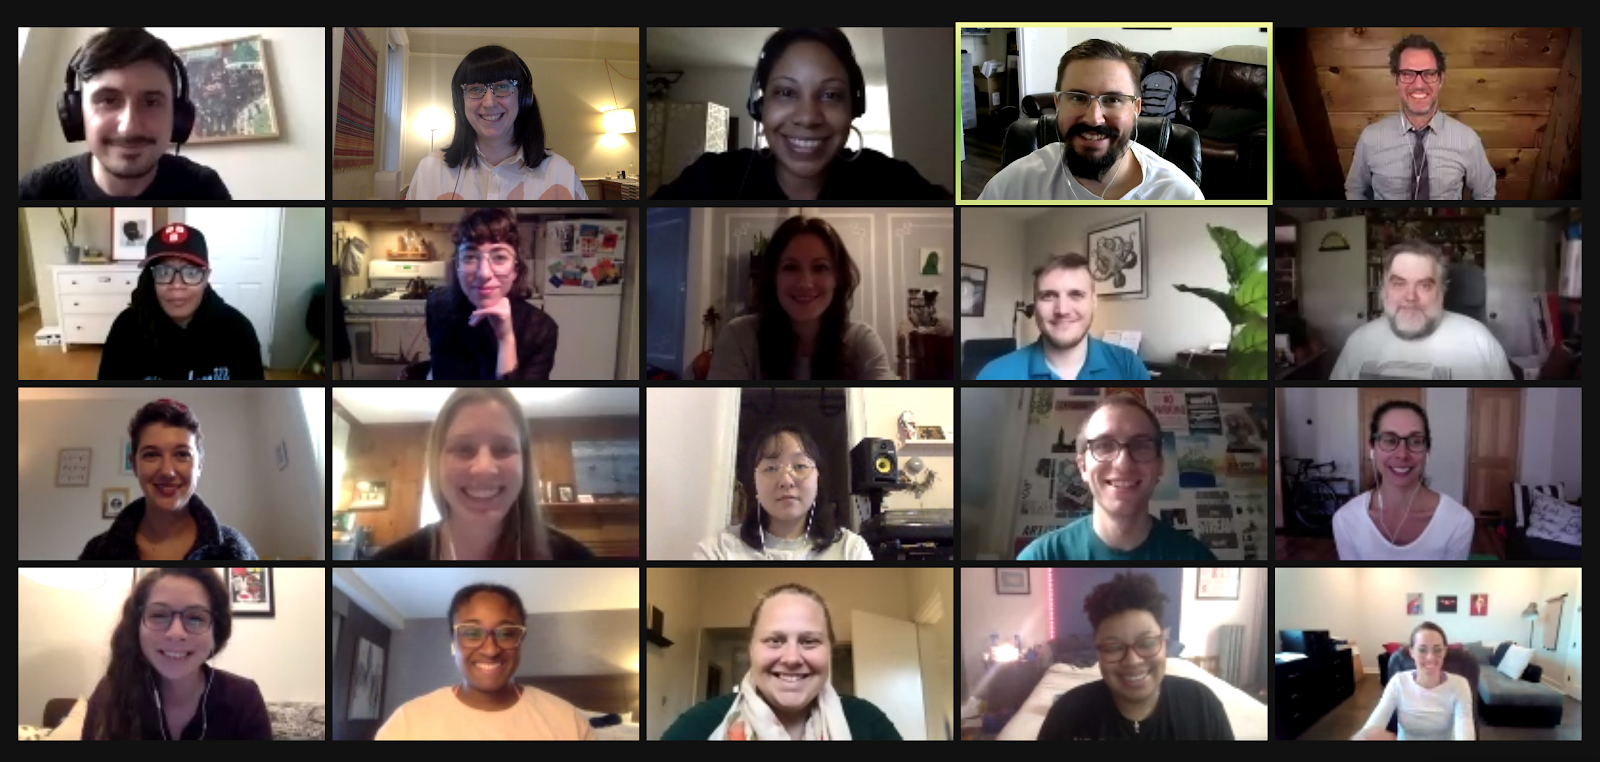 A picture of a Zoom meeting between twenty people.